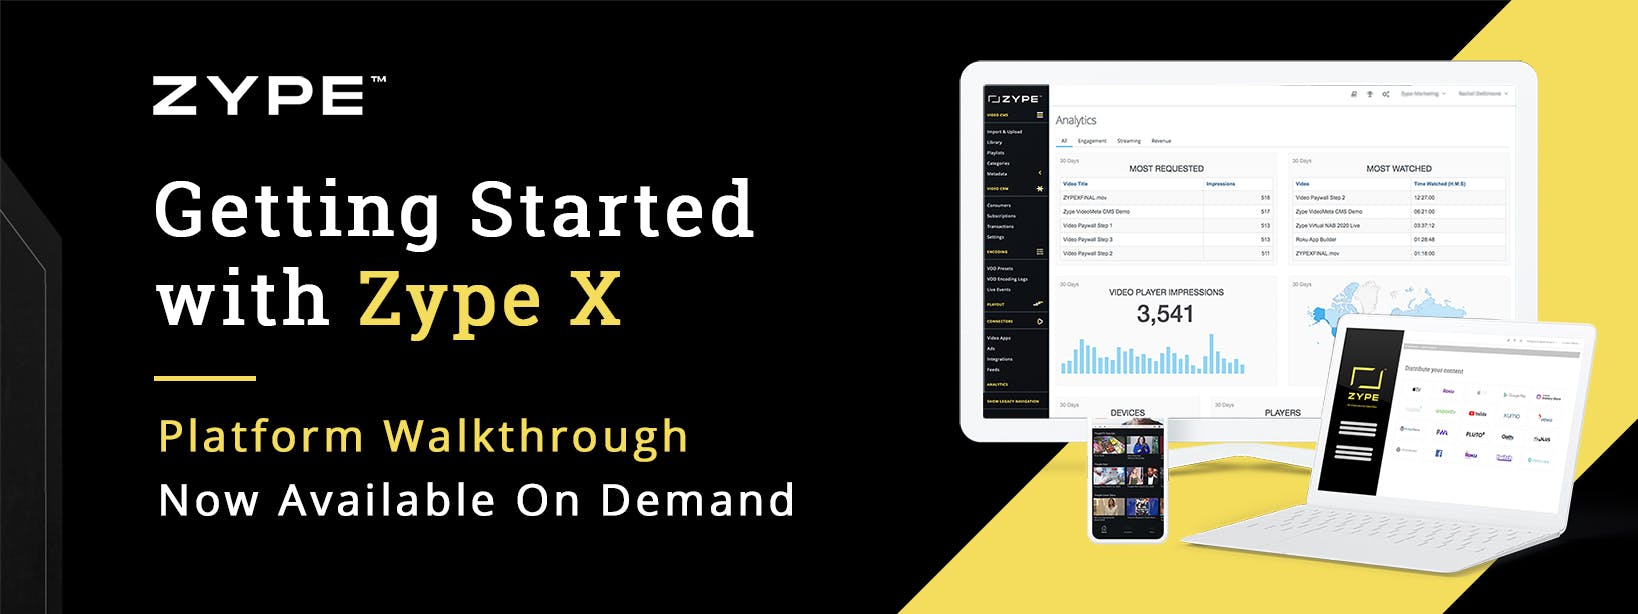 VOD Webinar - How to Get Started Streaming with Zype X